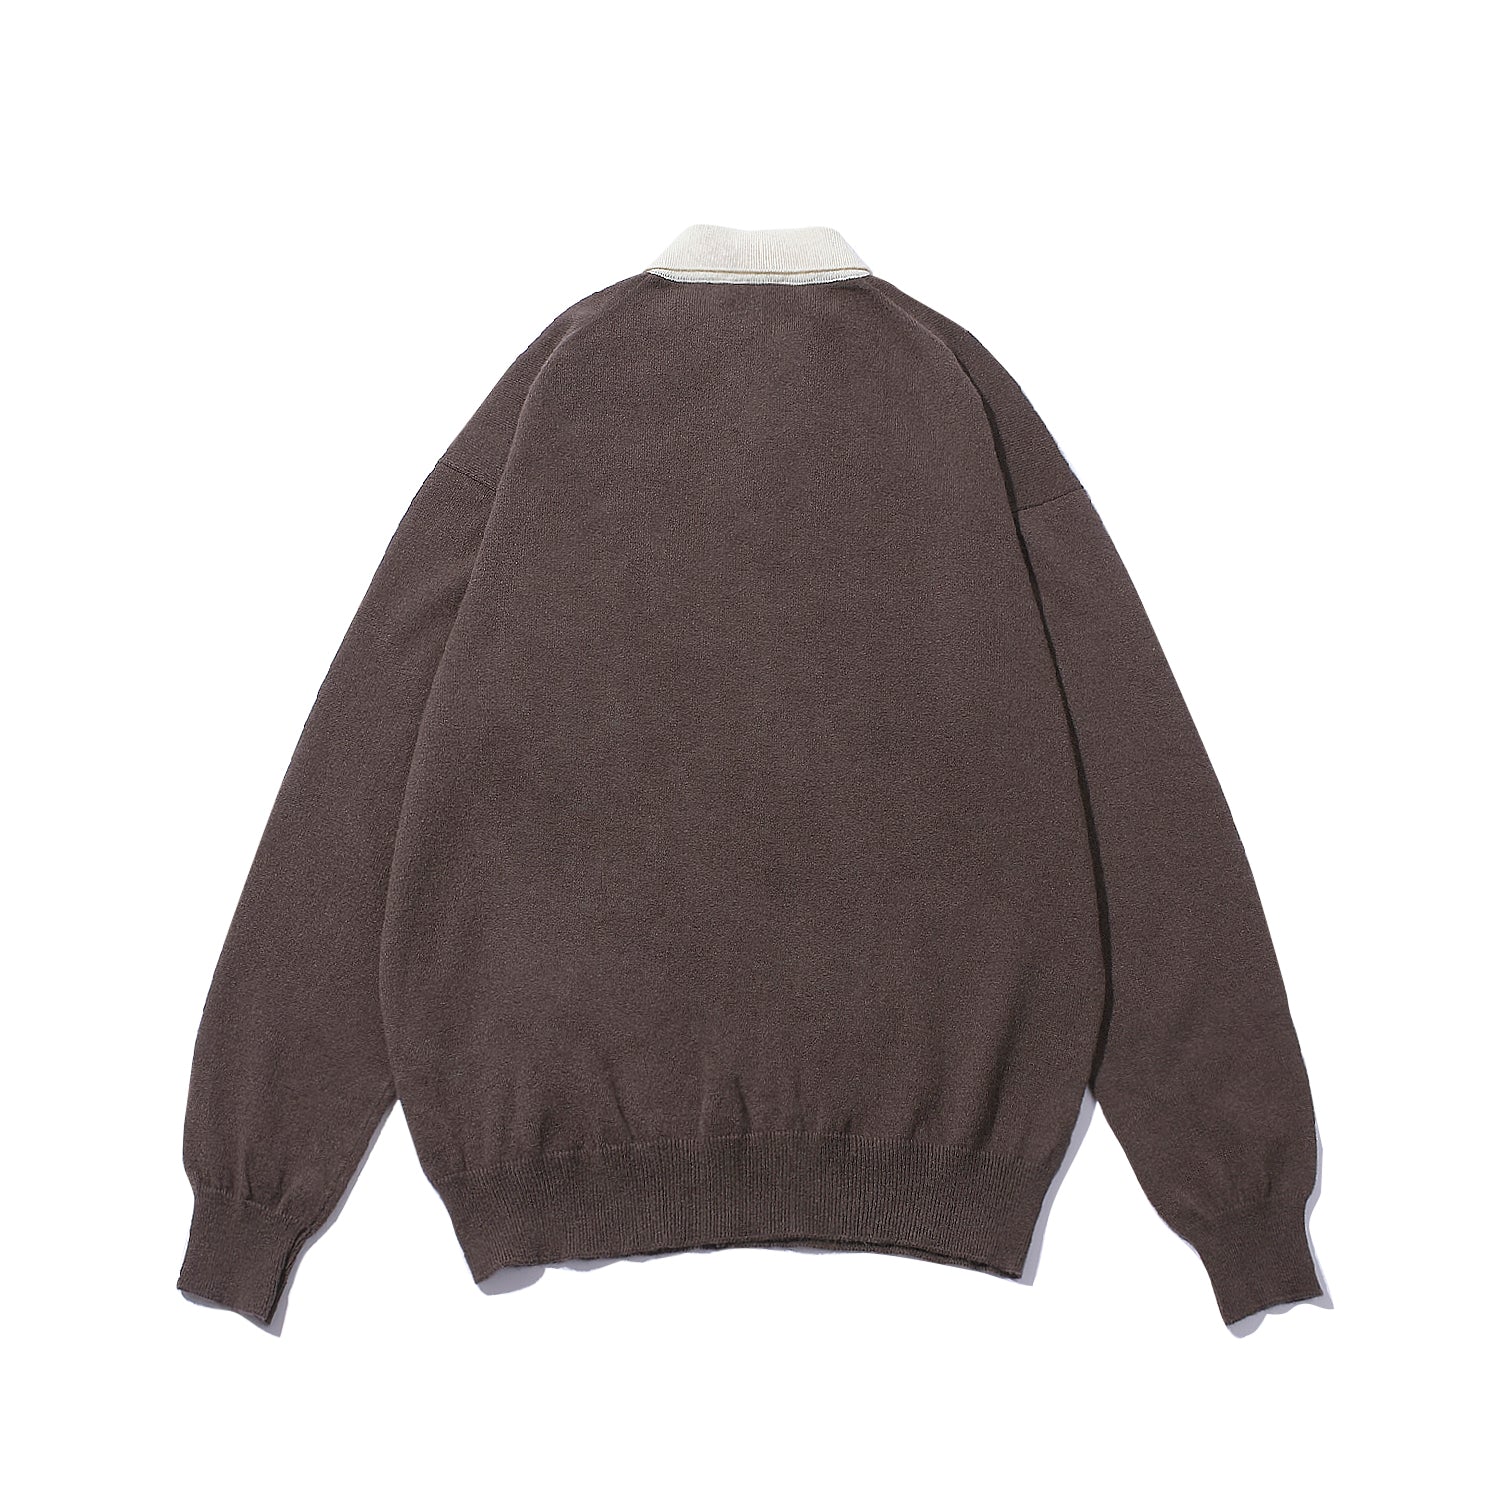 Brown Cashmere Knitted Rugby Shirt